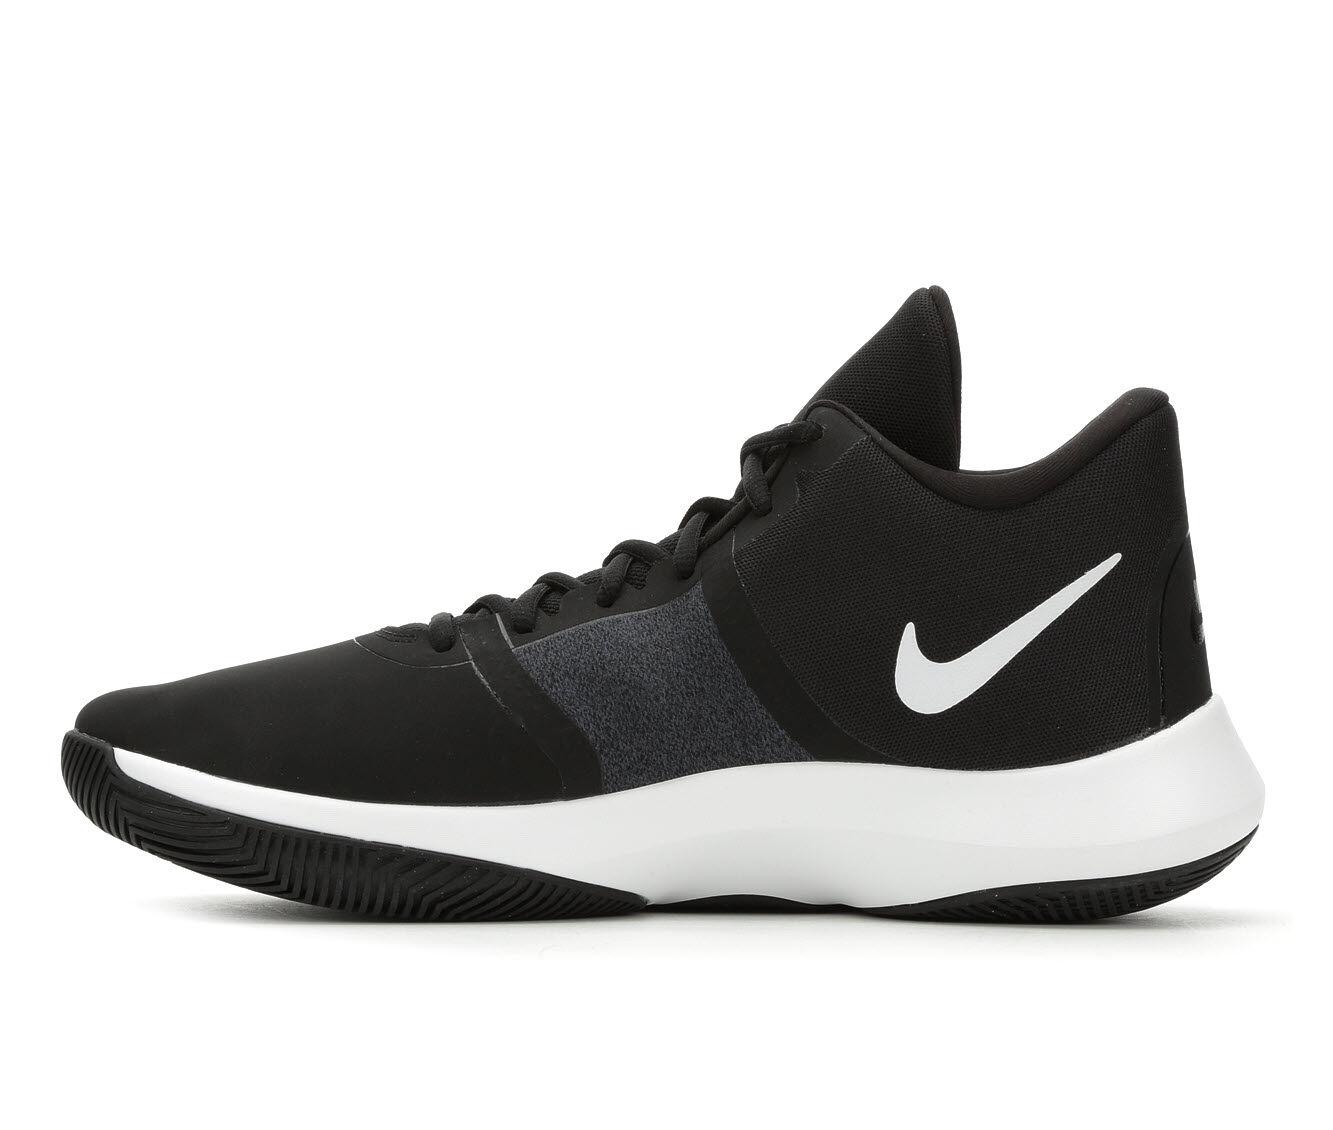 Nike Rubber Air Precision Ii Nbk Basketball Sneakers From Finish Line ...